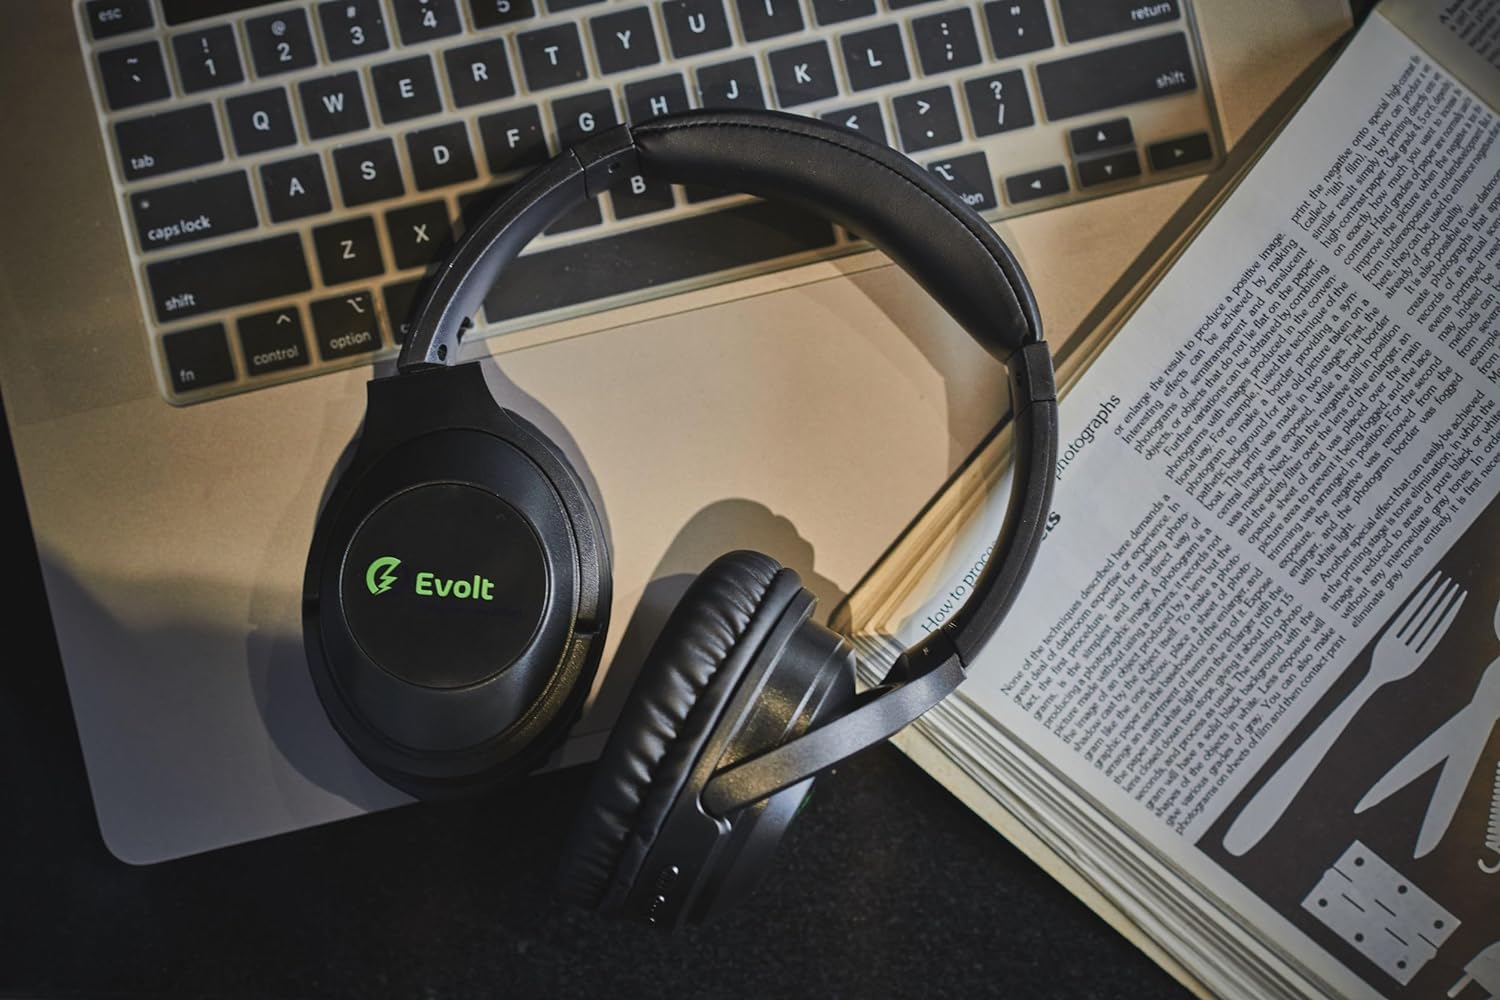 Evolt BH-100 Over-ear Wireless Headphones with AUX-In, Comfortable soft-paded finish, features 40mm speaker drivers, Multi-foldable design, upto 15 hours of music time